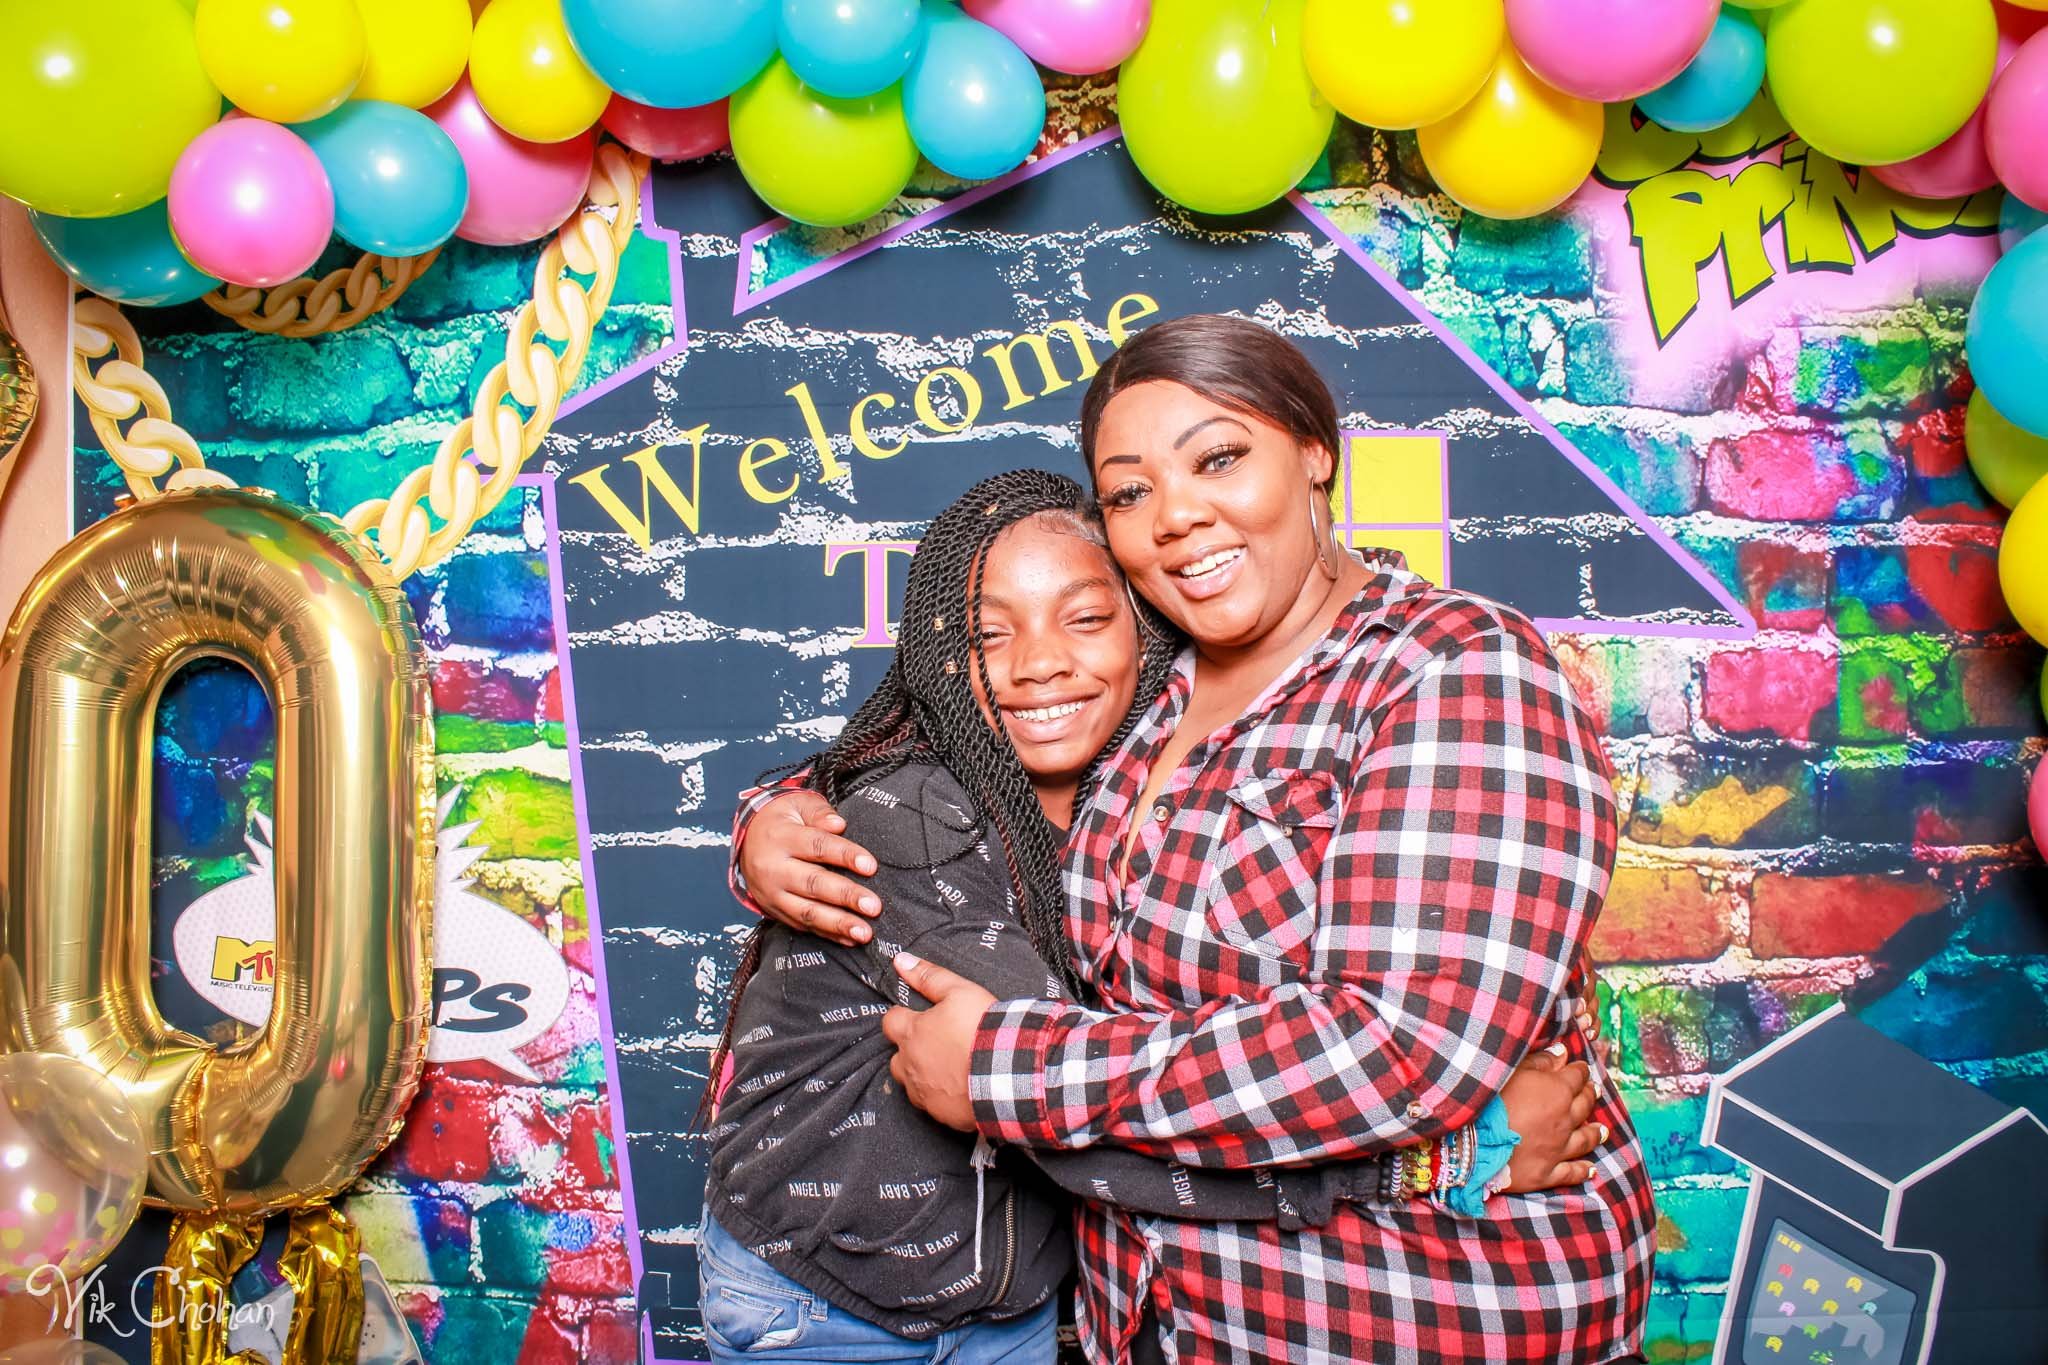 2022-11-26-Fabreonne-40-and-Fabulous-Birthday-House-Party-Photo-Booth-Vik-Chohan-Photography-Photo-Booth-Social-Media-VCP-026.jpg